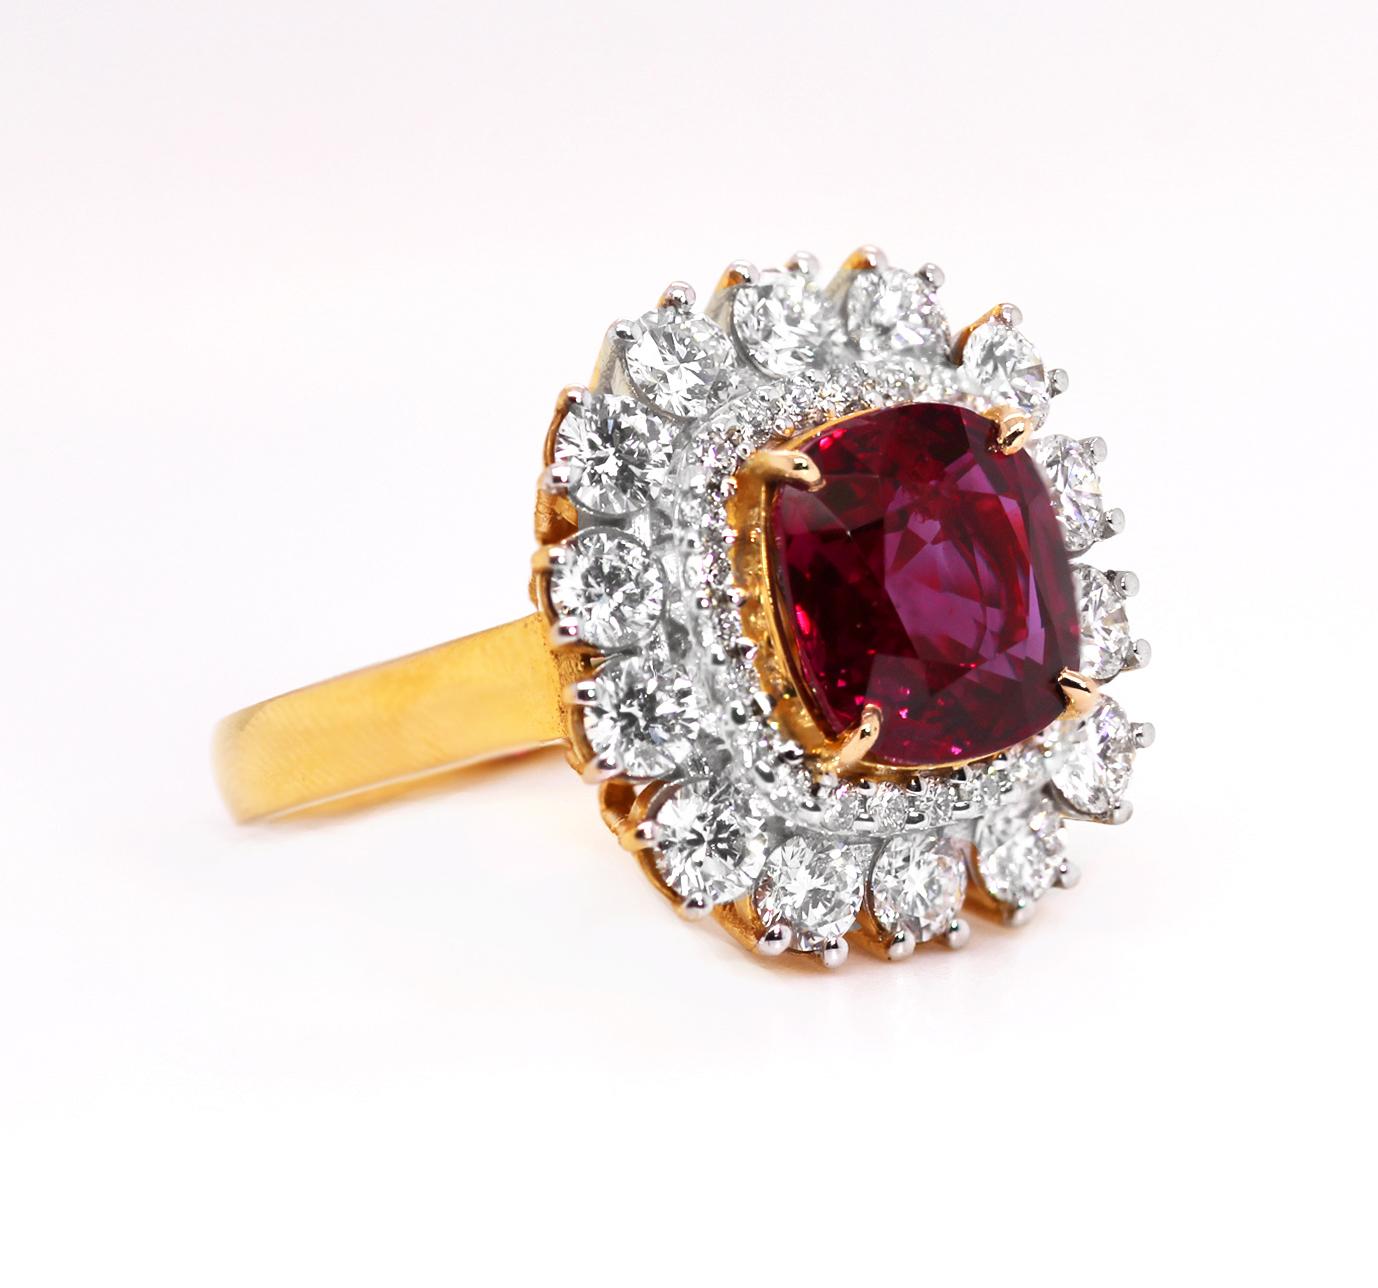 SSEF certified Burmese, Myanmar Ruby 4.53ct 'No Heat' & Diamond Ring in 18K In Excellent Condition For Sale In London, GB